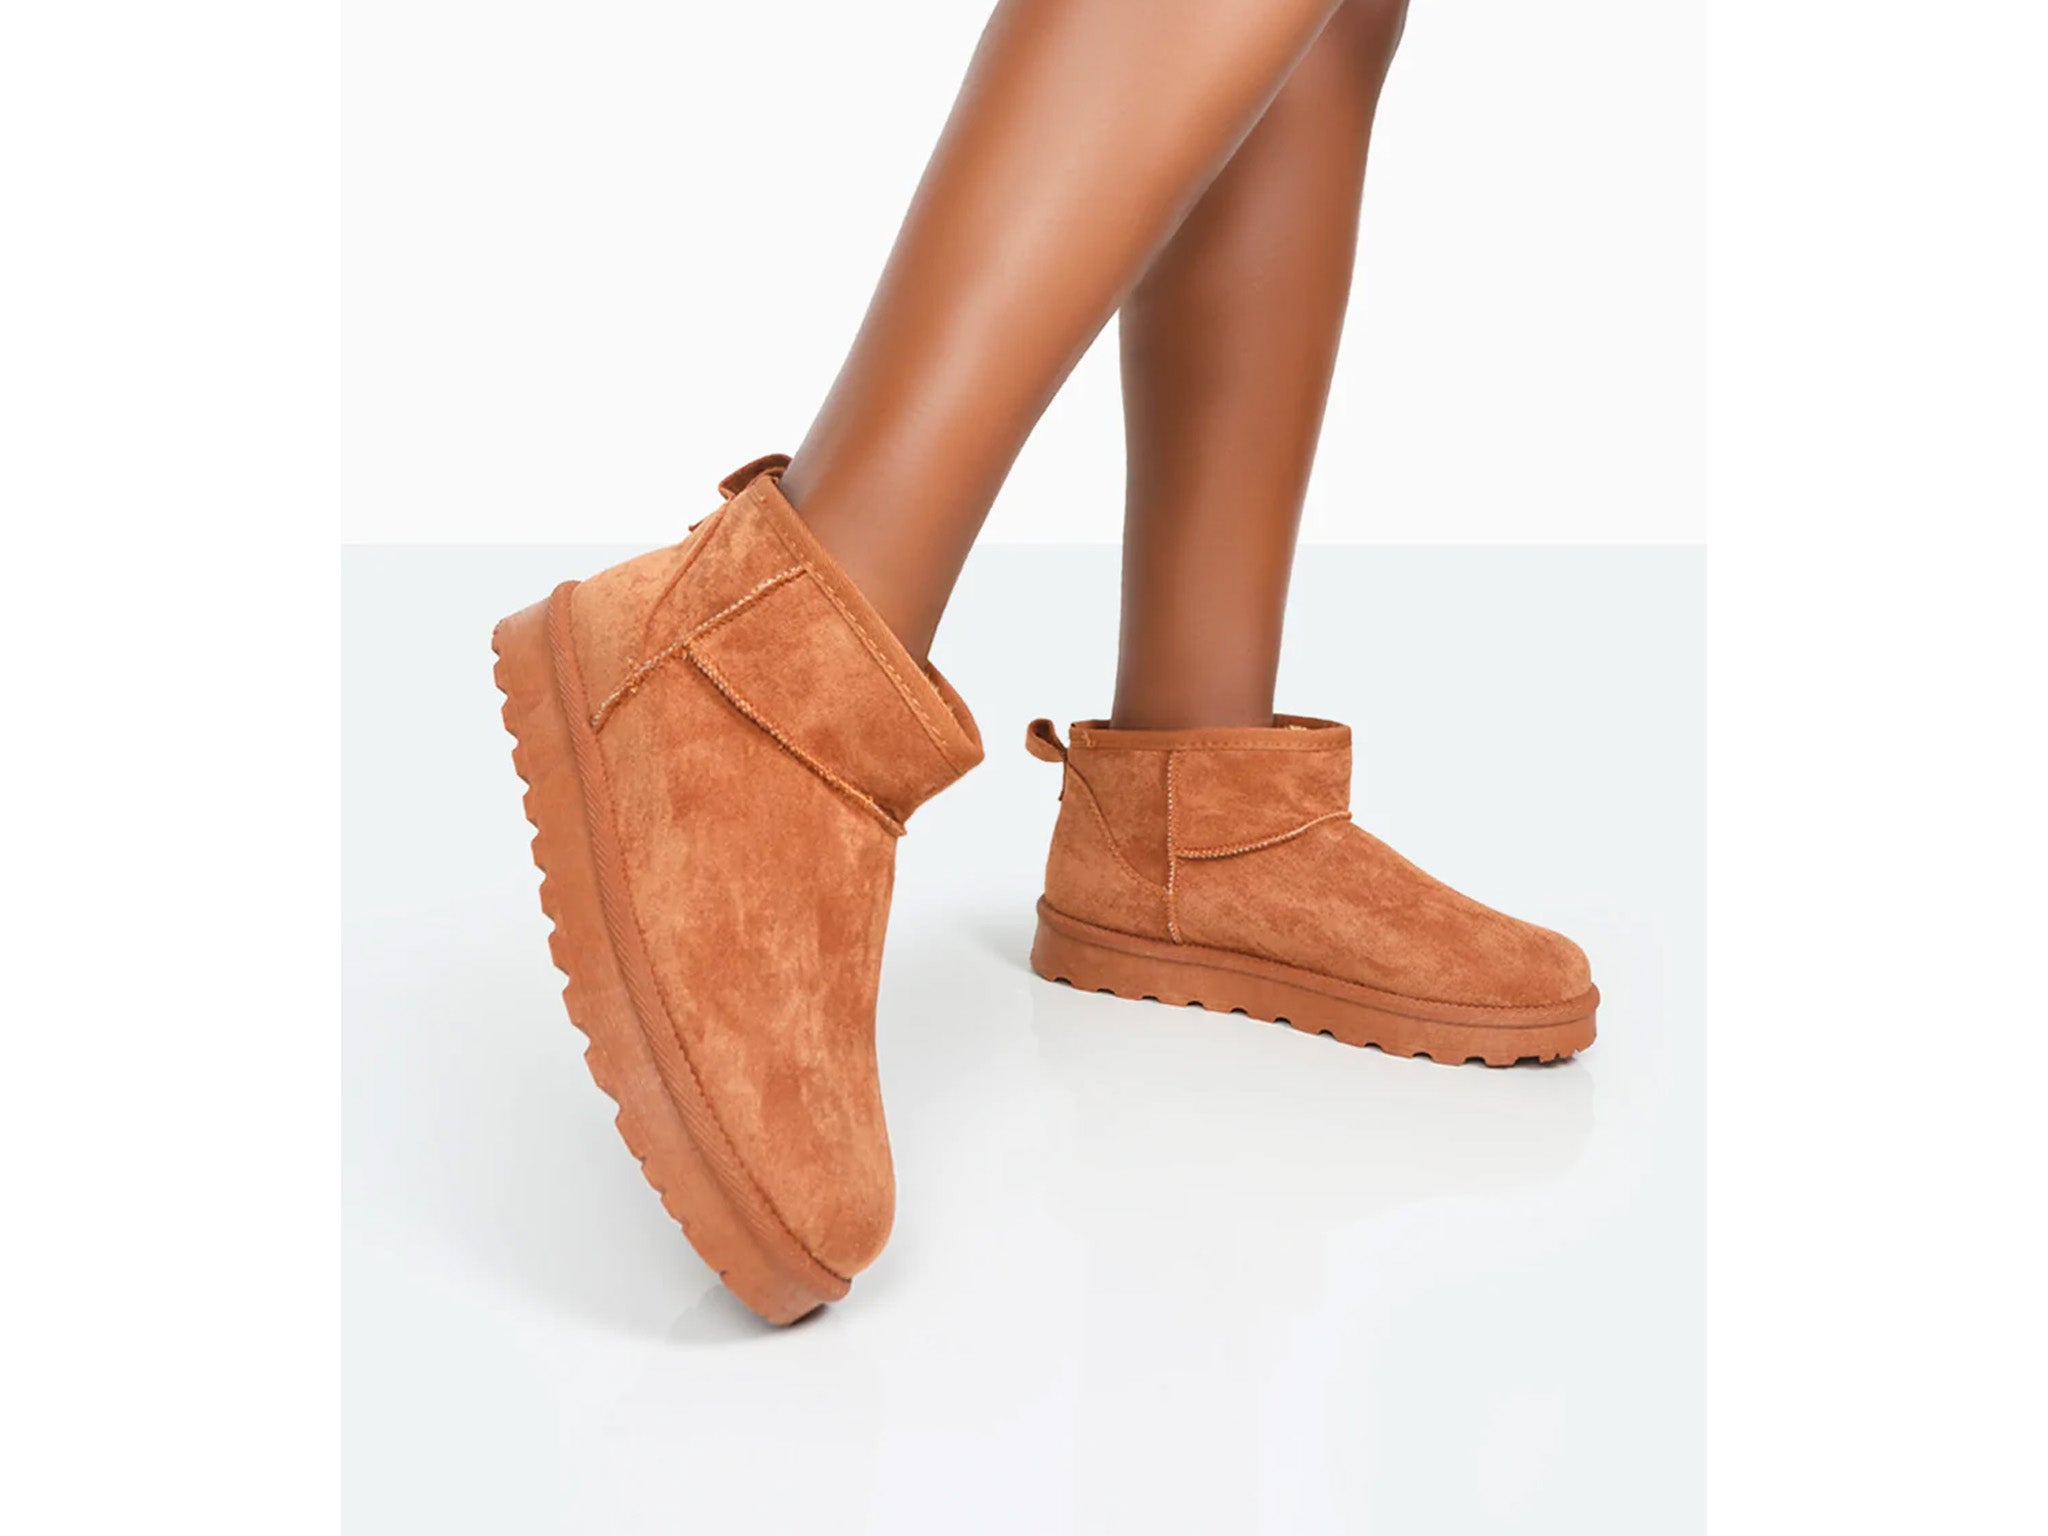 How To Style Ugg Platform Ultra Mini Boots (Plus Dupes) - The